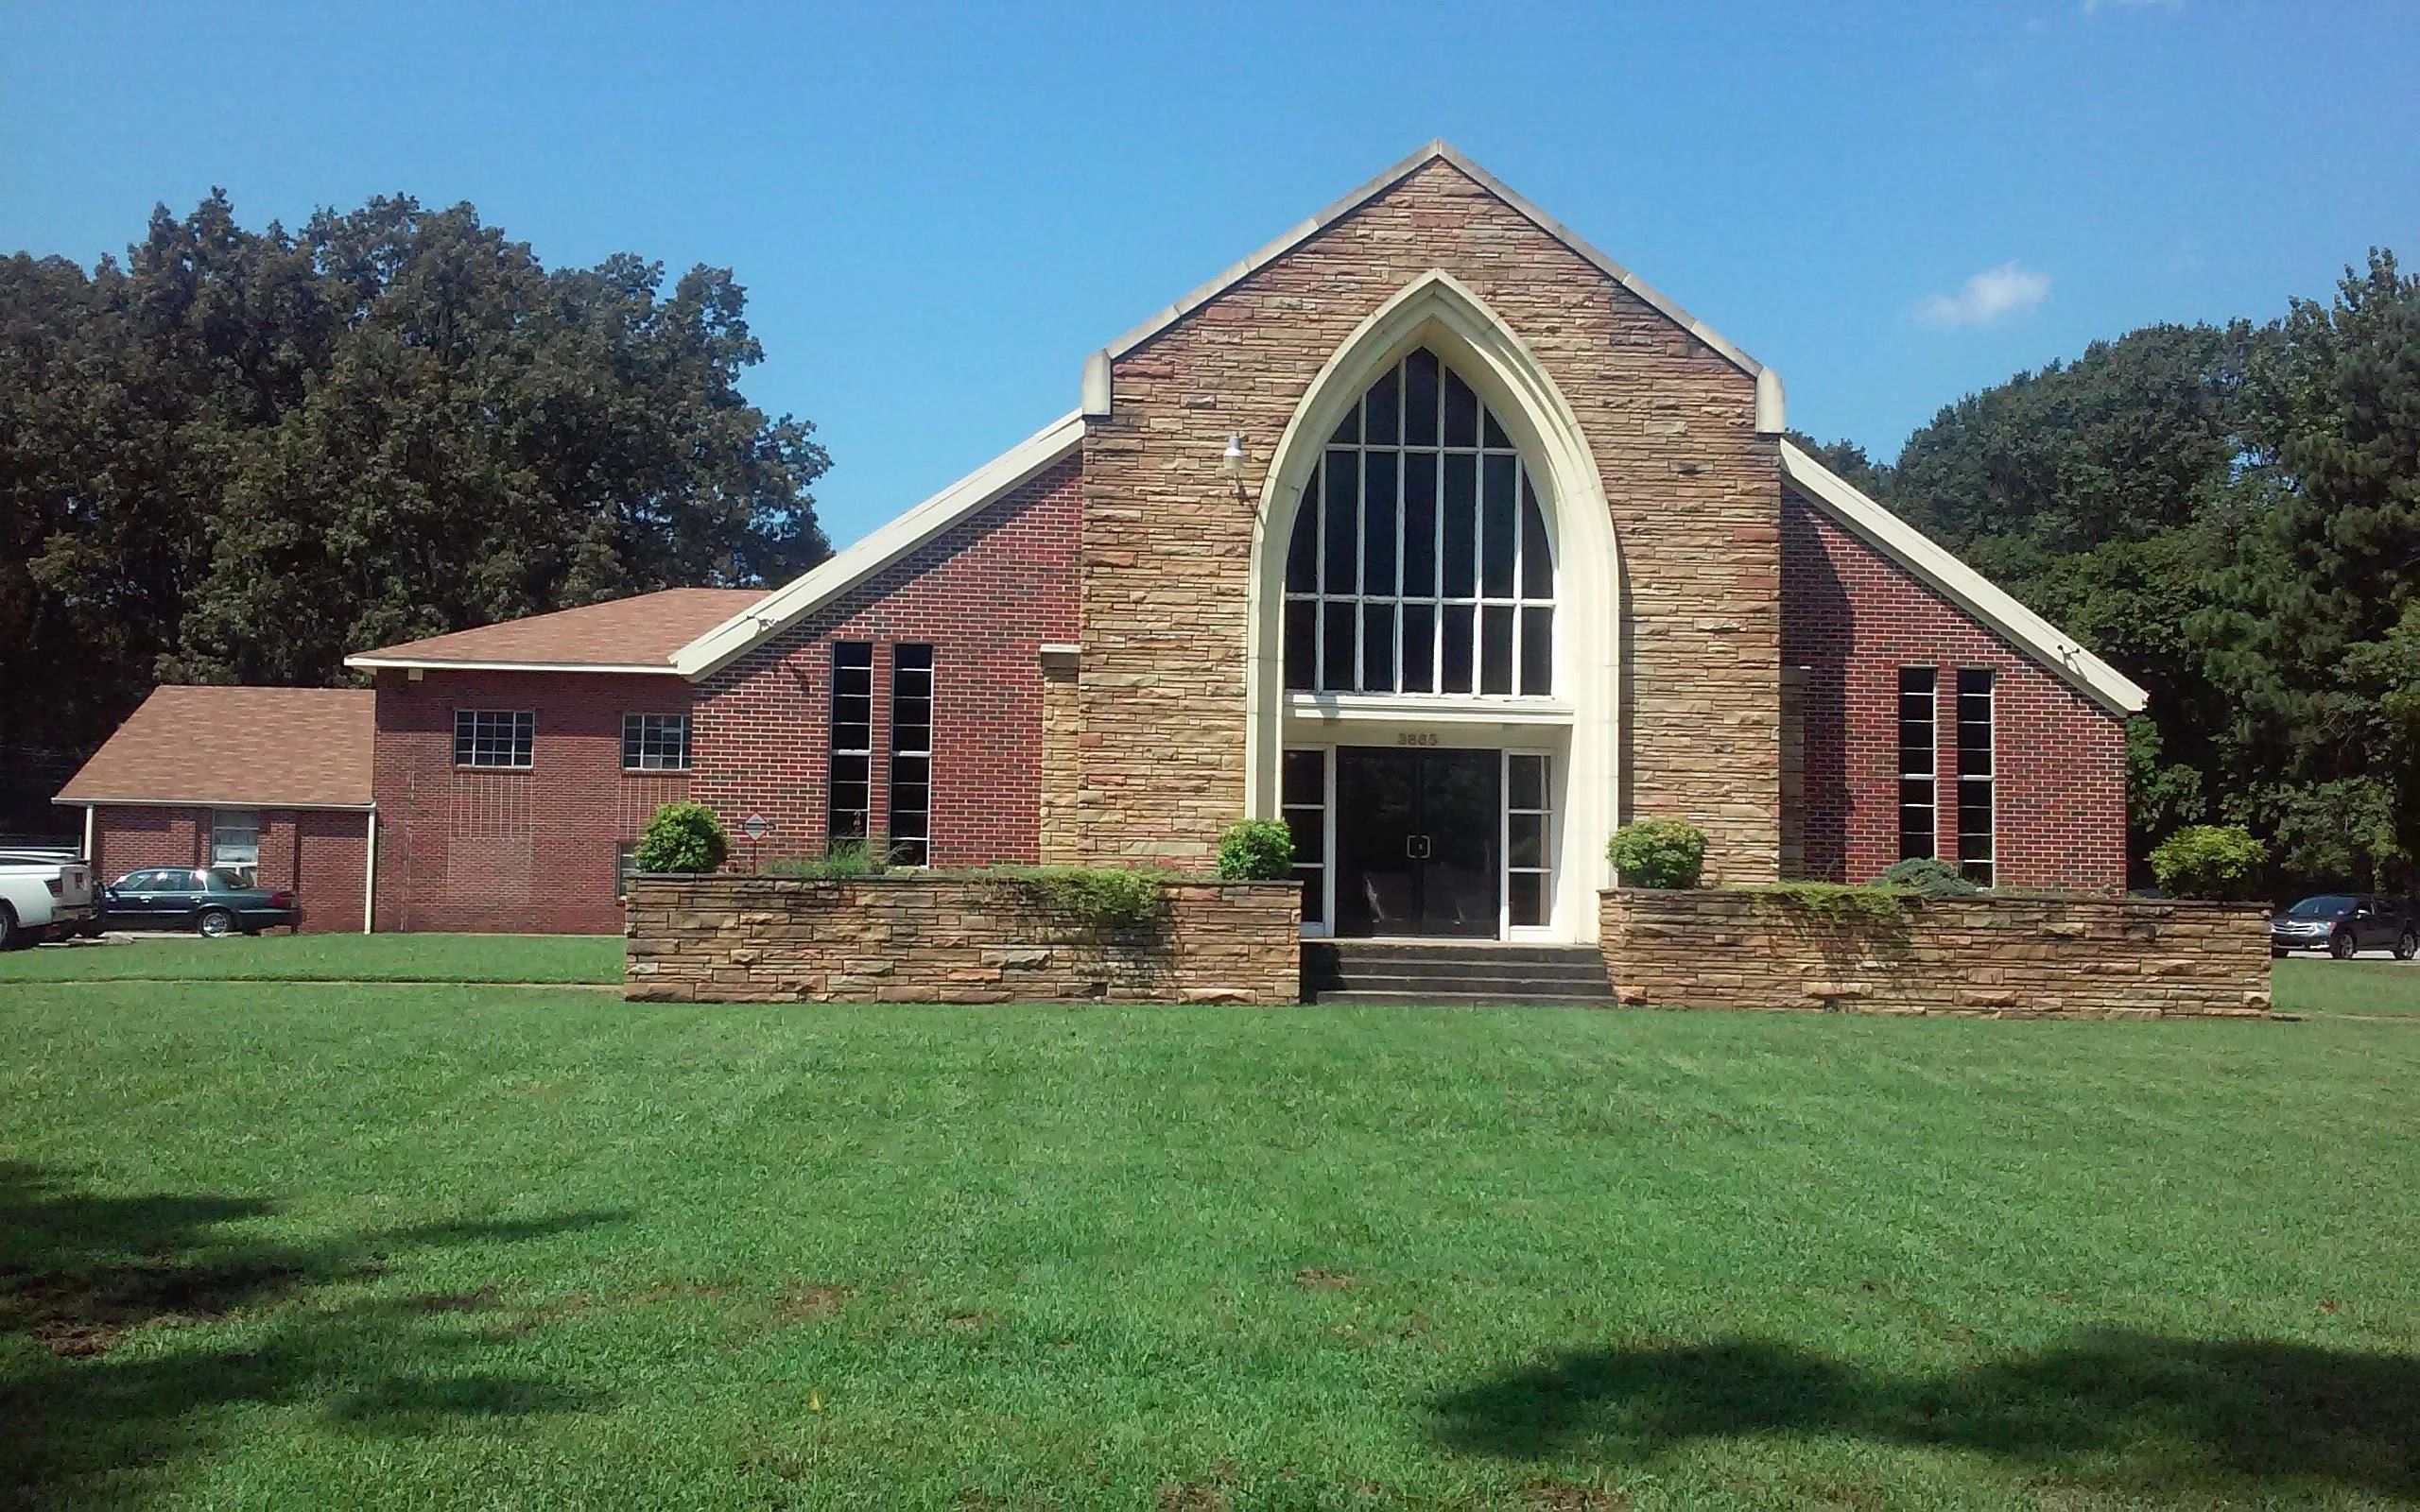 Orleans Road Church of Christ